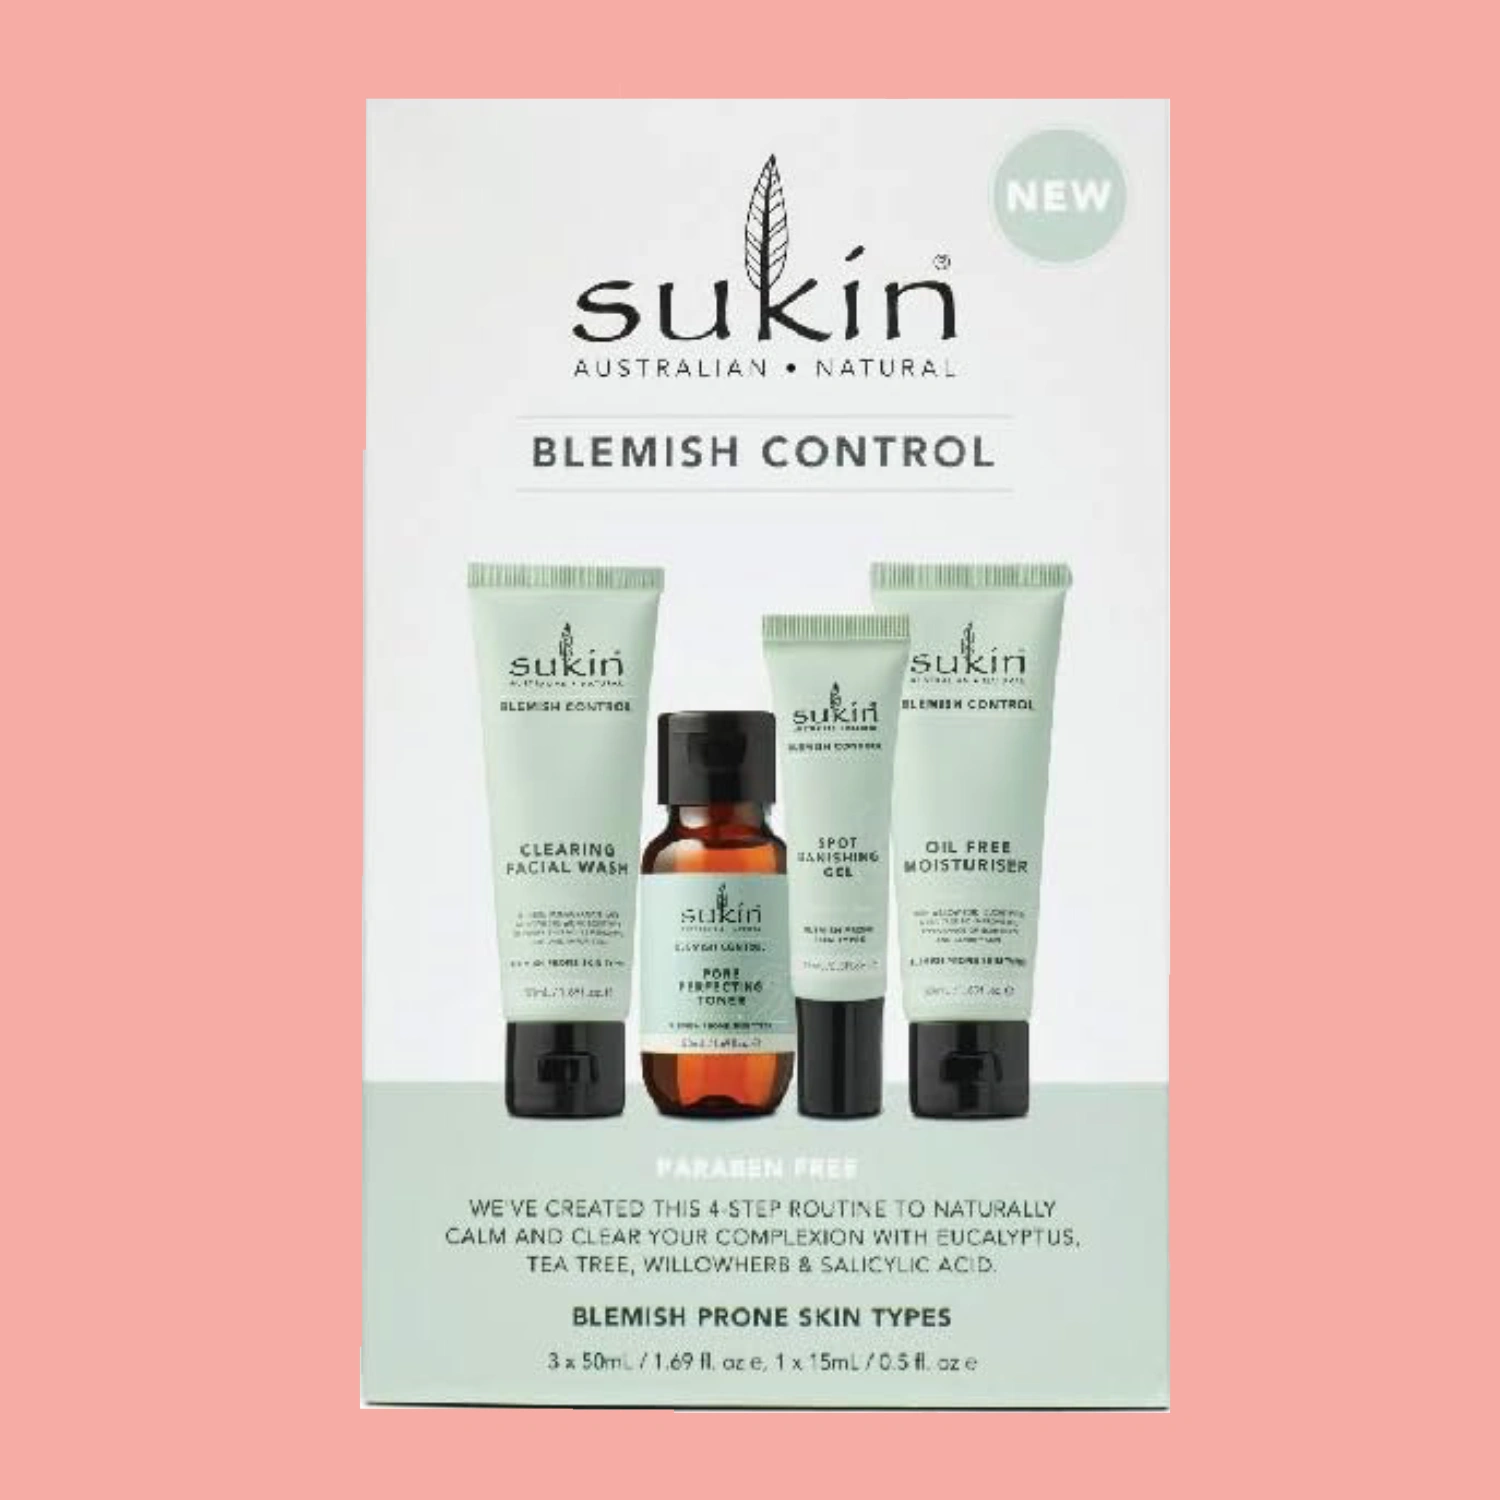 A box of Sukin Blemish Control Kit displayed against a neutral background